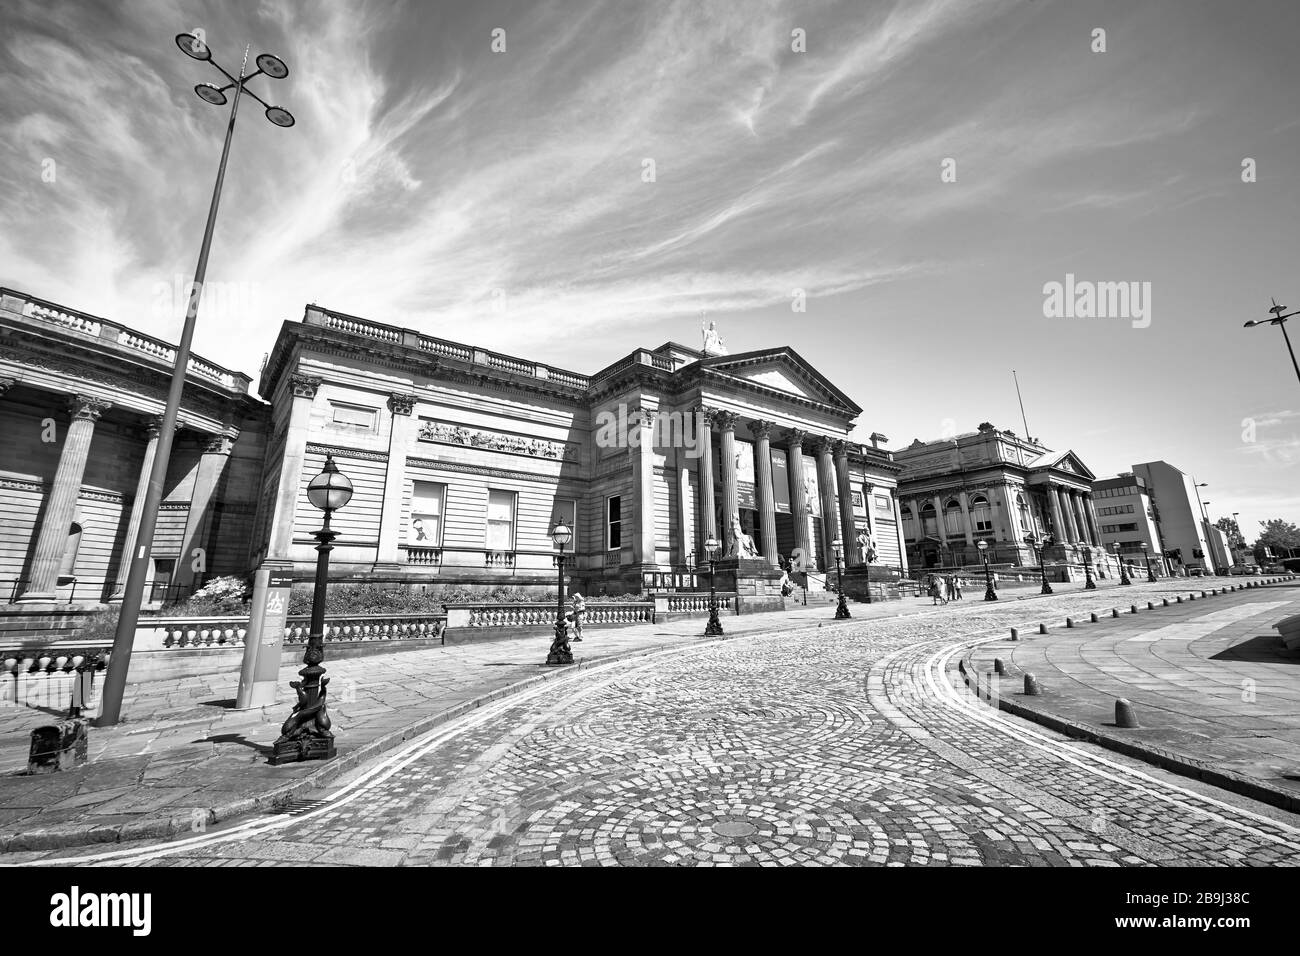 The Historic Walker Art Gallery on William Brown Street à Liverpool, Angleterre, Royaume-Uni Banque D'Images